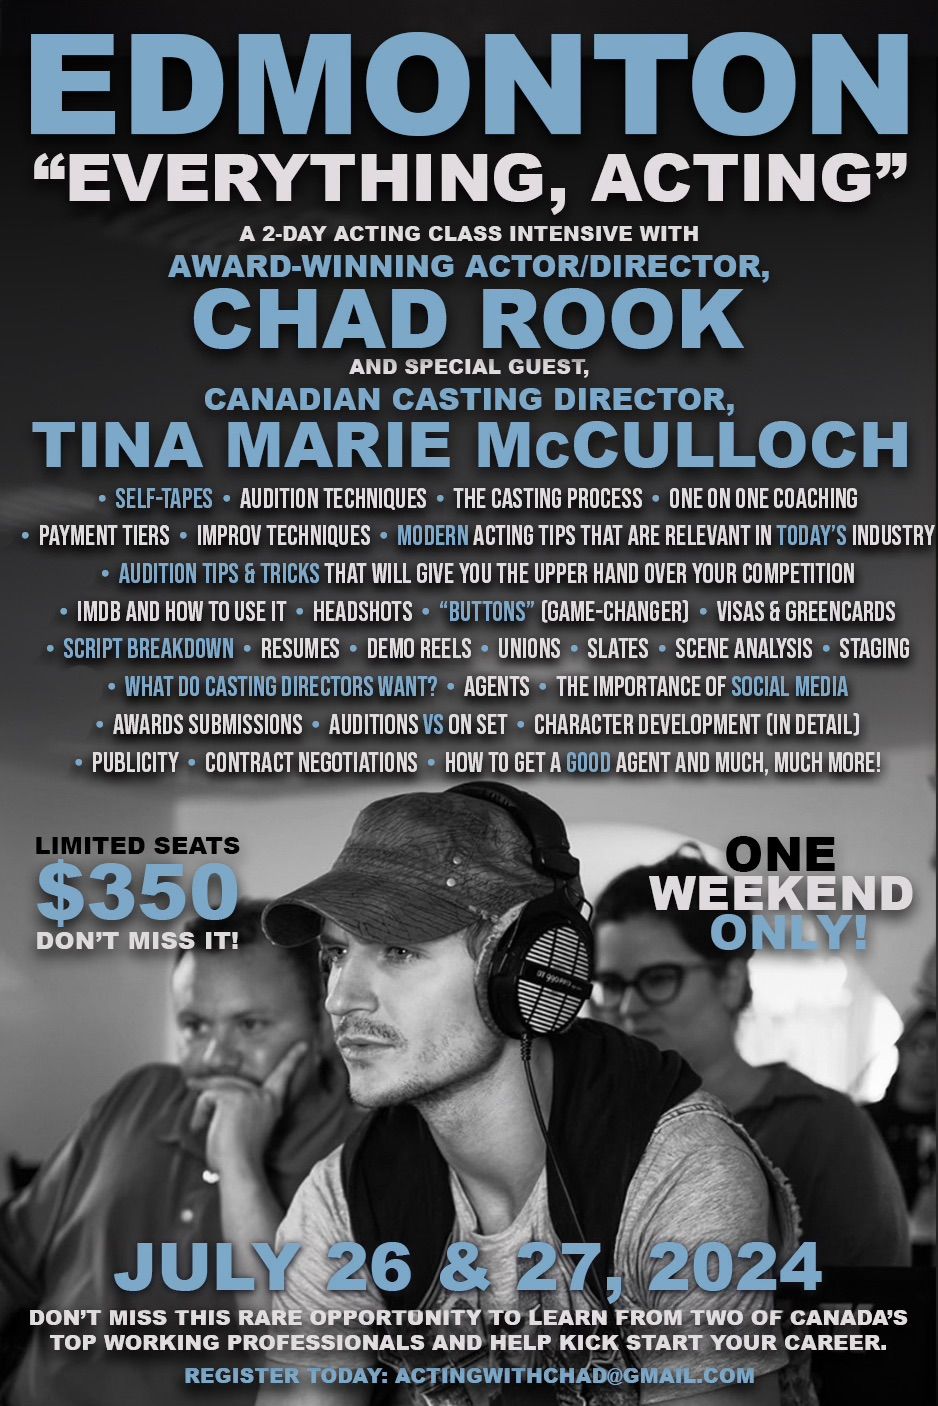 A 2-Day Intensive Acting Class with Actor, Chad Rook & Casting Director, Tina Marie McCulloch